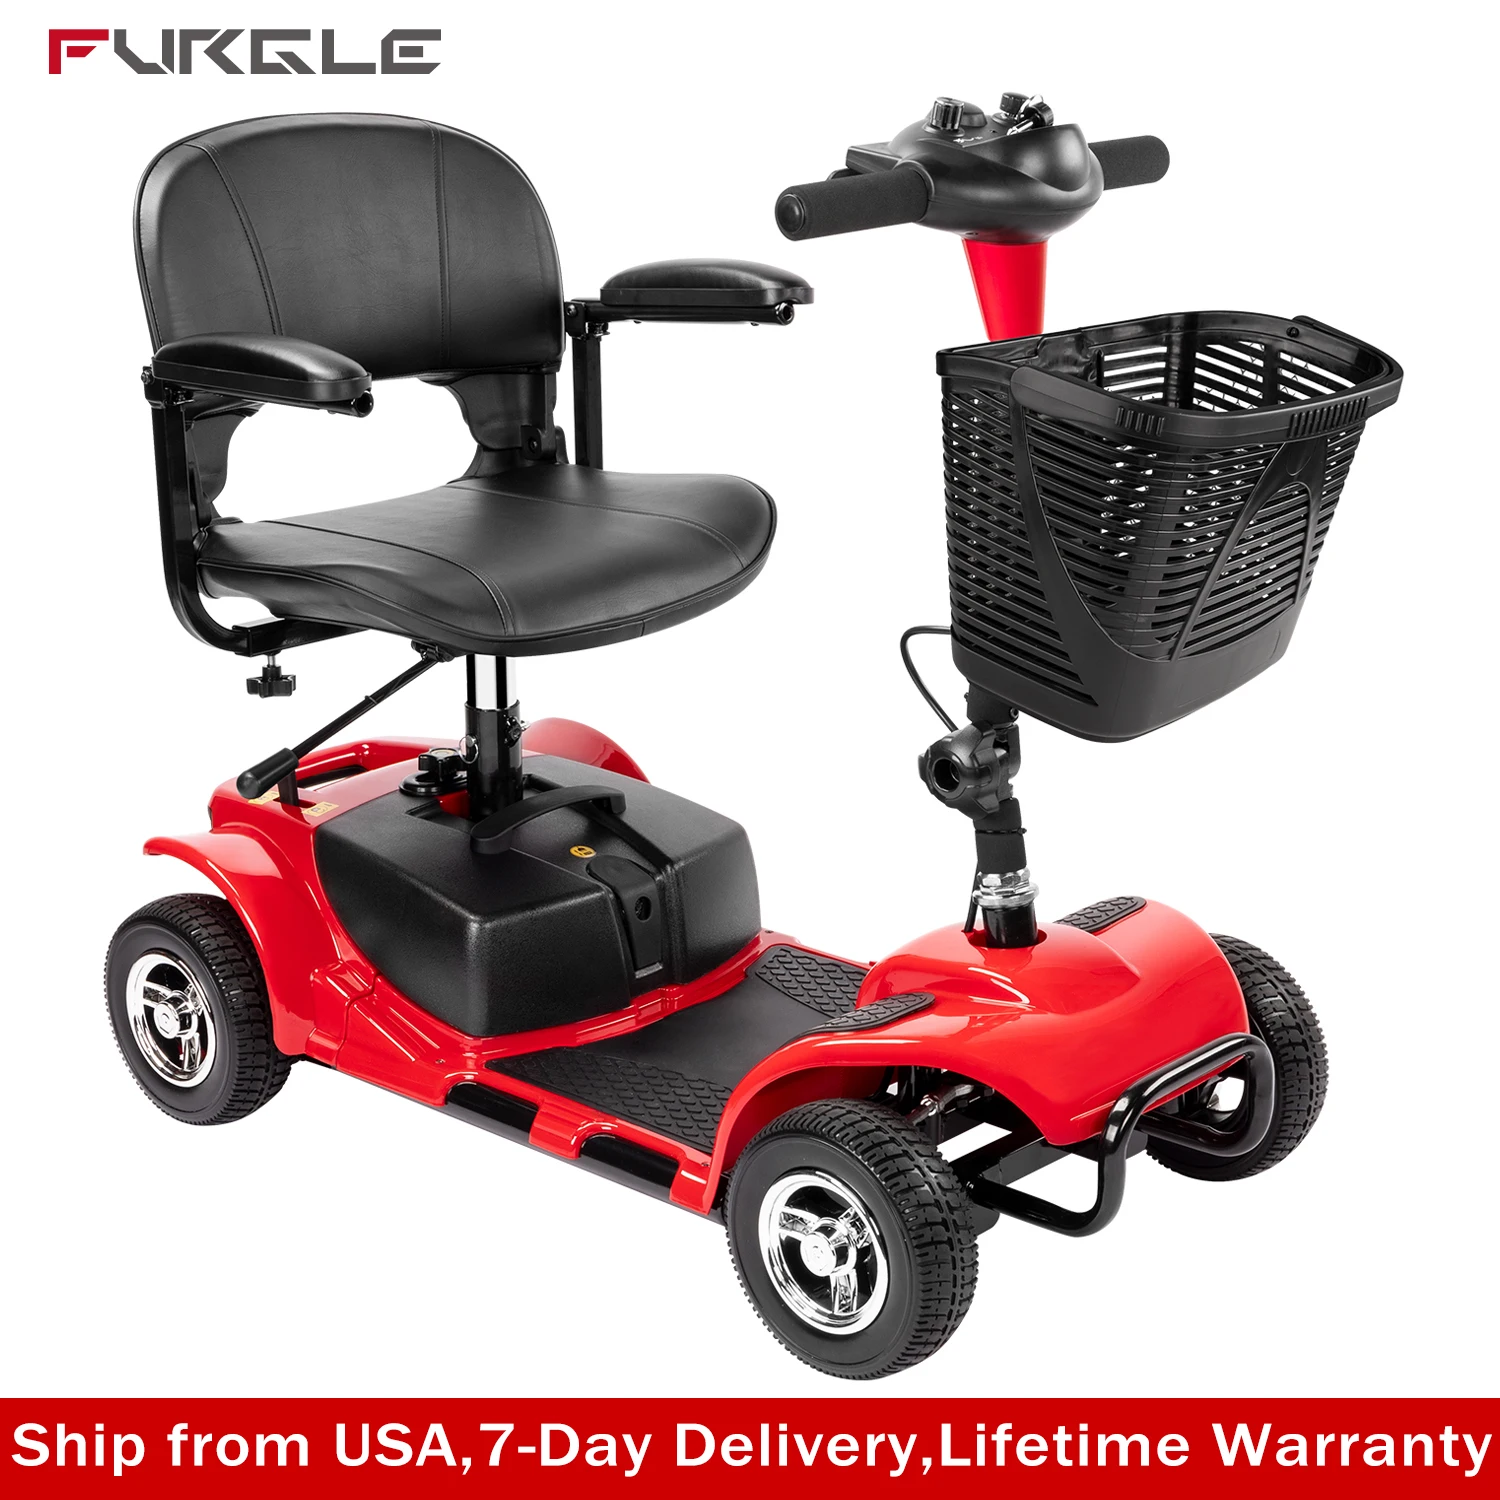 

4-Wheel Powered Mobility Scooter Electric Wheelchair Collapsible Compact Duty Travel Scooter w/ Basket for Seniors Adult Elderly